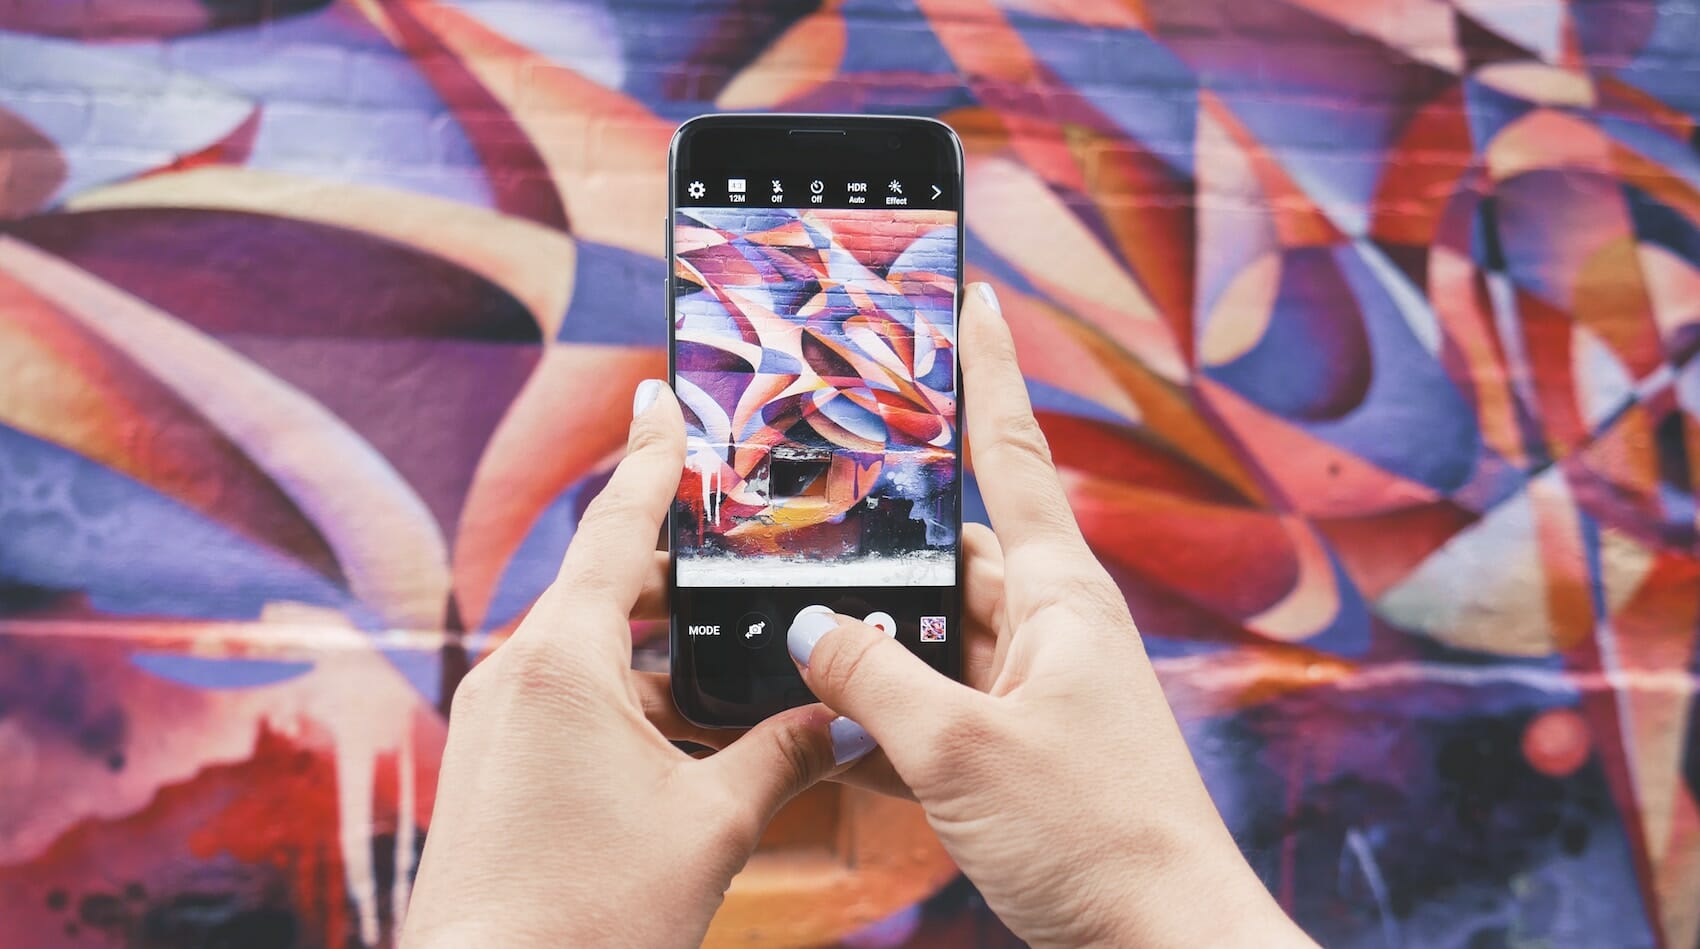 instagram marketing for clients